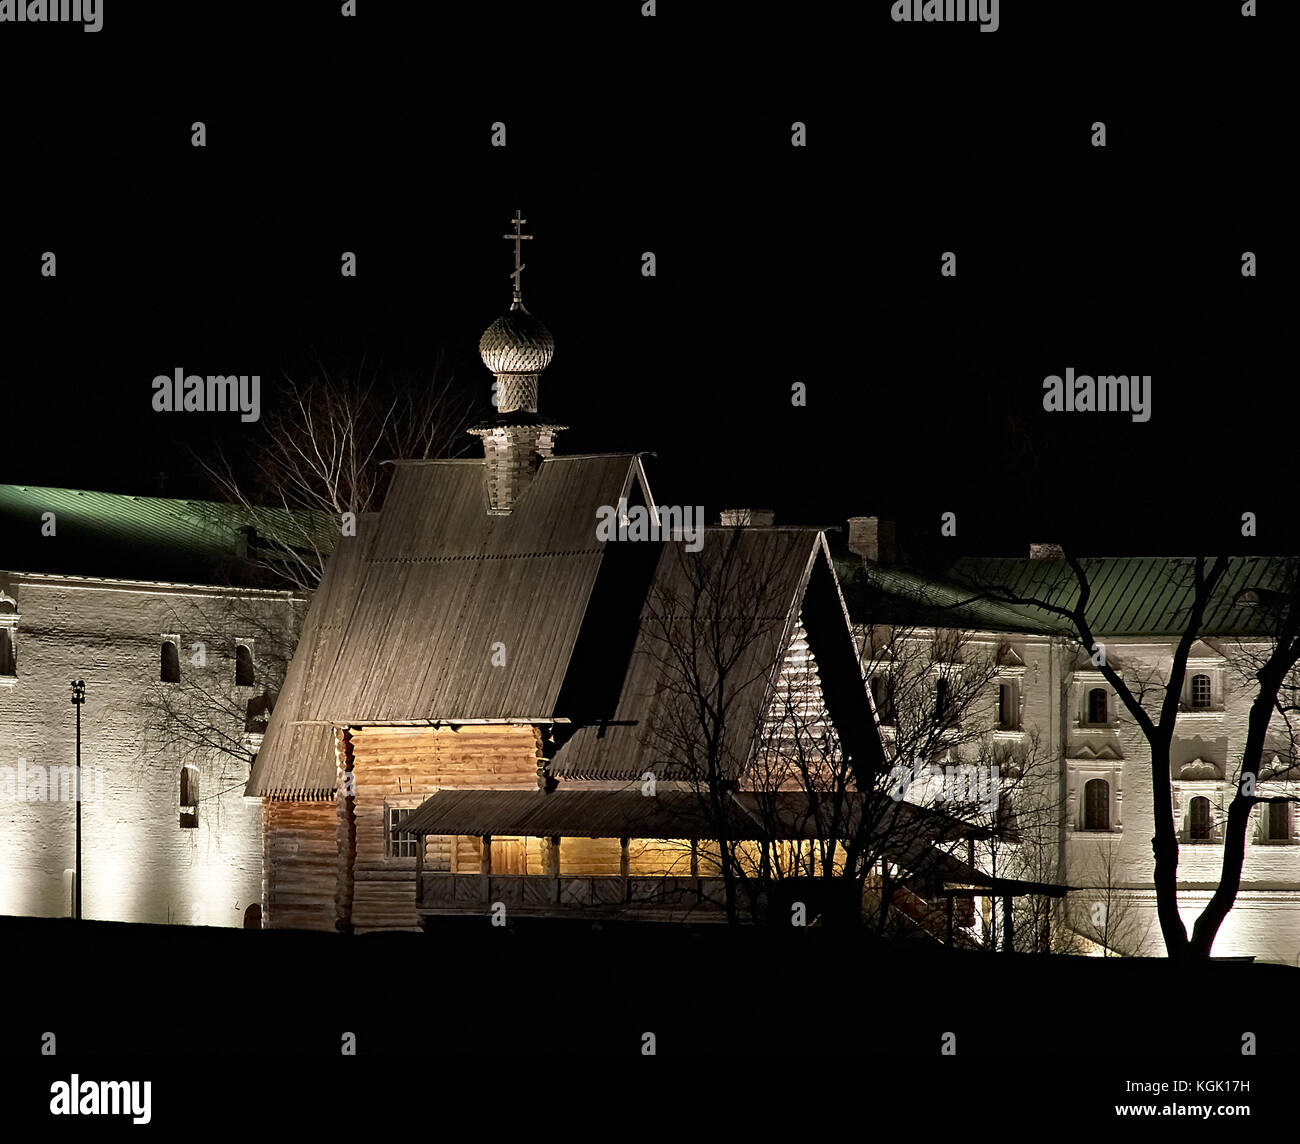 The night landscape of Suzdal. Night shooting of a wooden Orthodox church in the Suzdal Kremlin.Suzdal.Golden Ring of Russia.Wooden Orthodox church Stock Photo